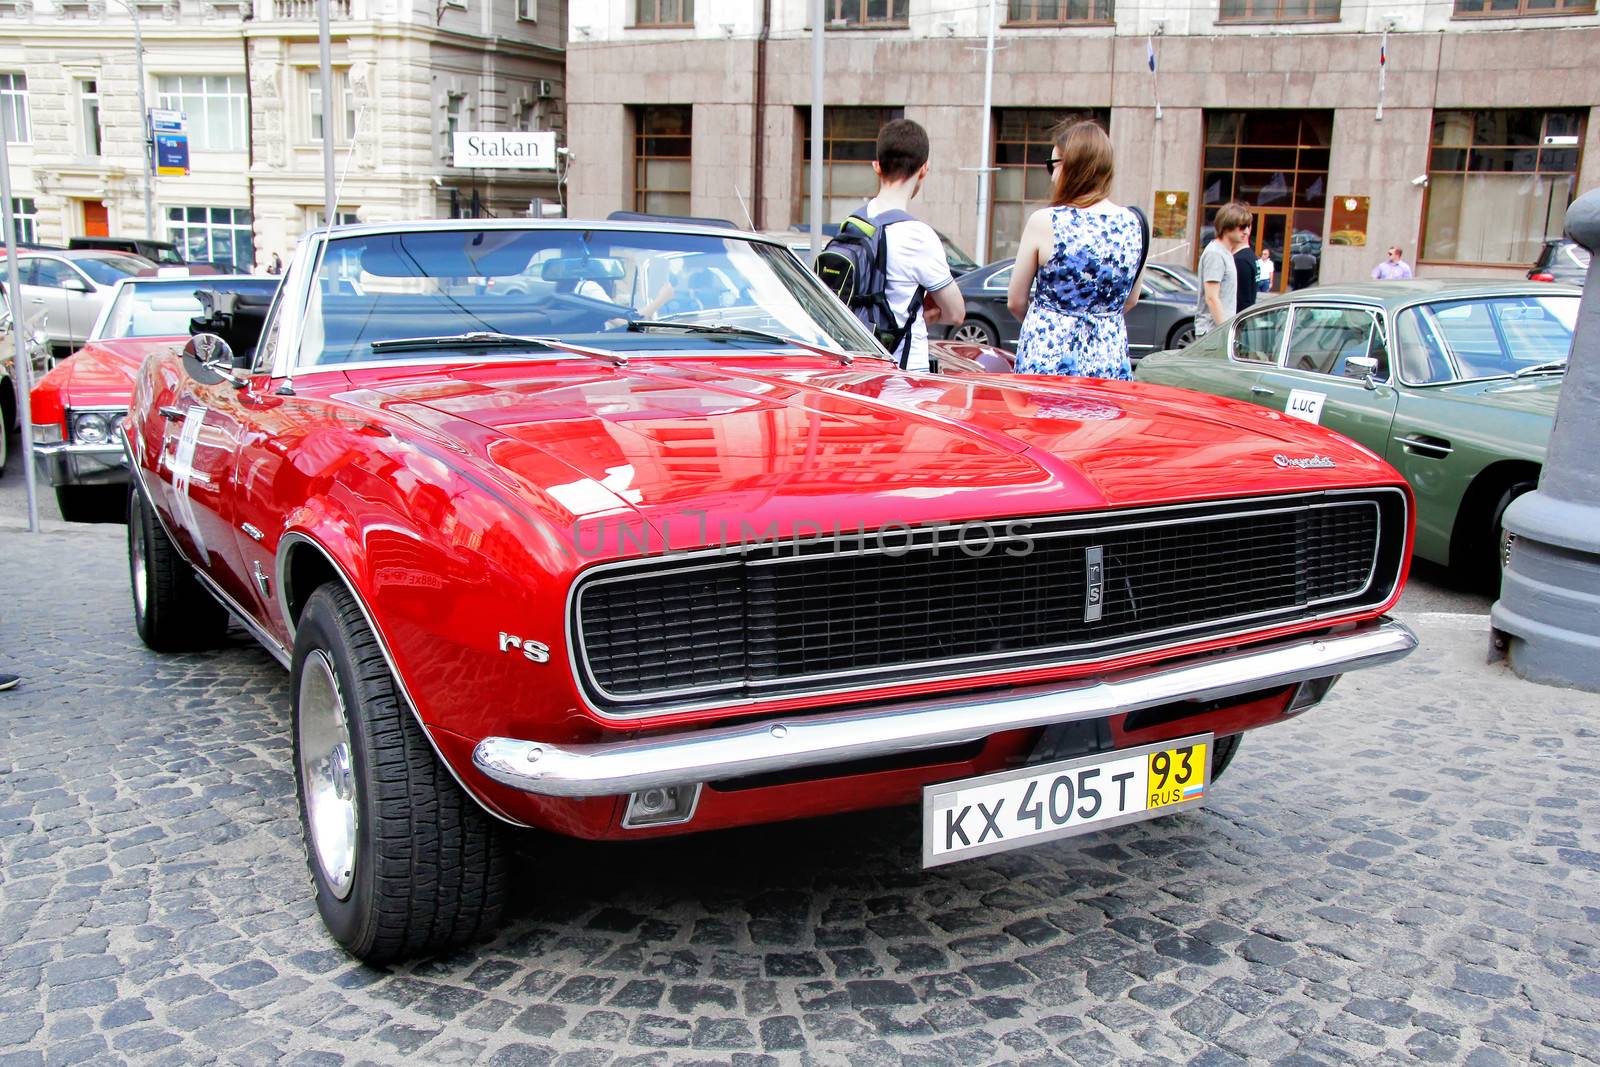 MOSCOW, RUSSIA - JUNE 2: American motor car Chevrolet Camaro RS competes at the annual L.U.C. Chopard Classic Weekend Rally on June 2, 2013 in Moscow, Russia.